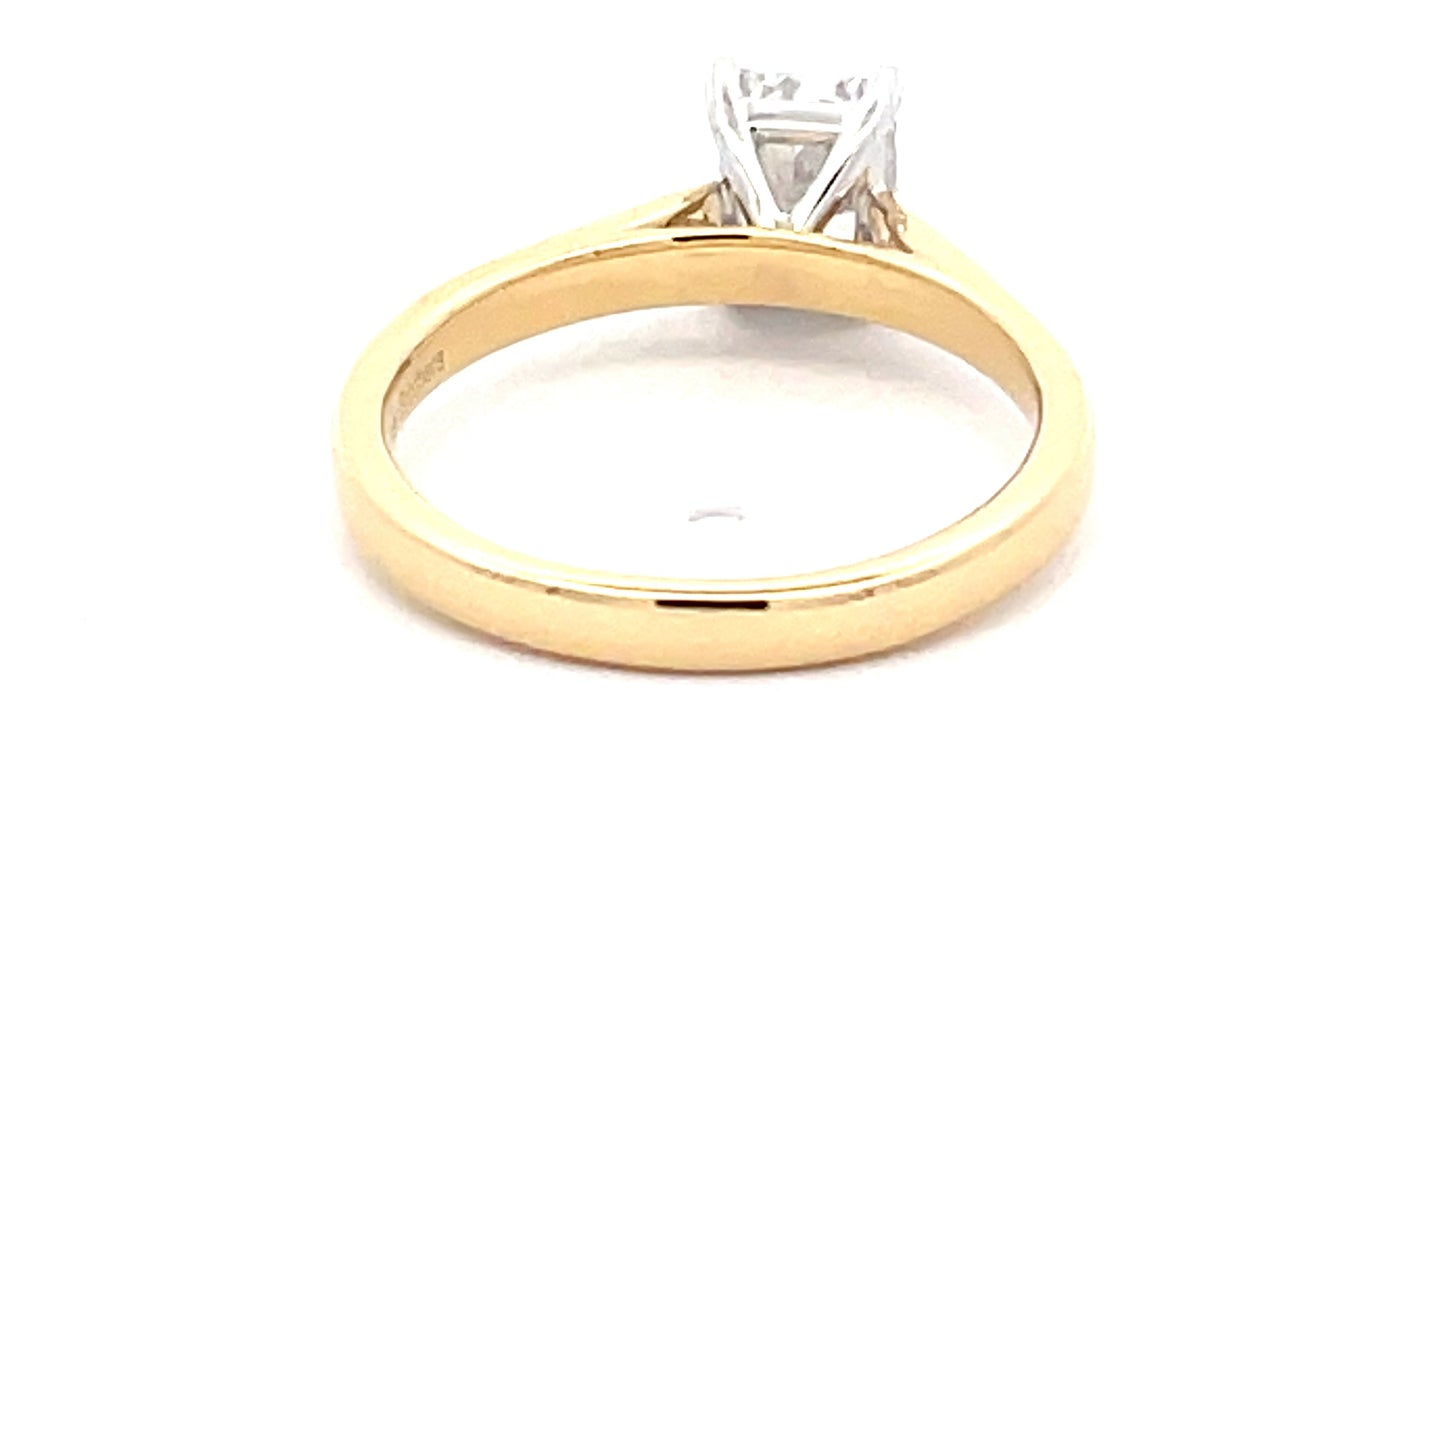 Radiant Cut Diamond Solitaire Ring - 1.00cts  Gardiner Brothers   